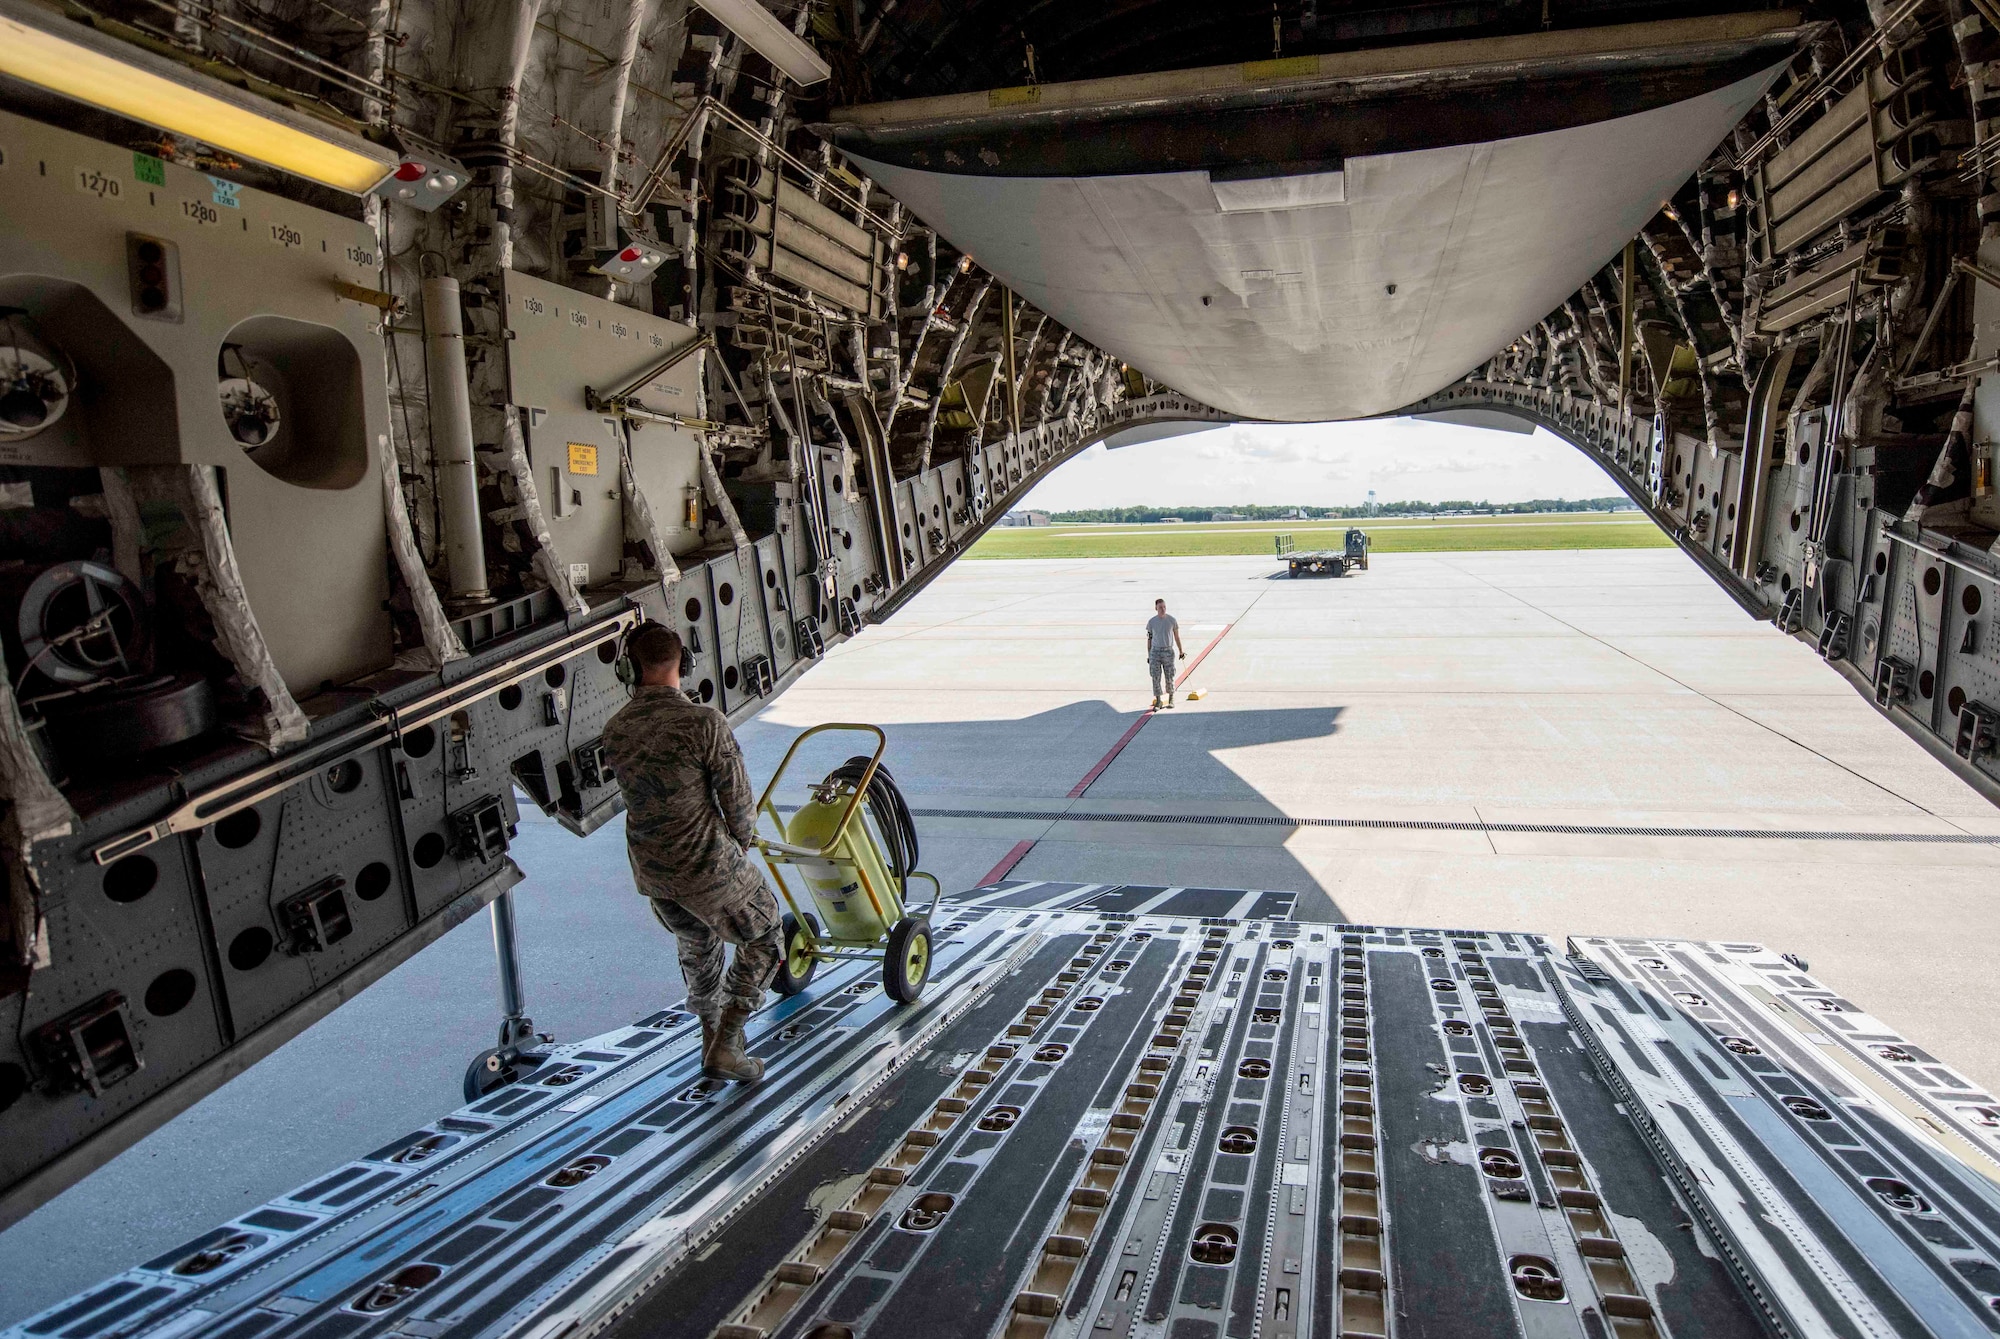 Airmen from Joint Base Charleston and Scott AFB team up to unload a C-17 Globemaster III assigned to the 437th Airlift Squadron during Hurricane Florence evacuation efforts, Sept. 11, 2018, at Scott AFB, Illinois. More than 1 million people have been ordered to evacuate Virginia, North Carolina and South Carolina in preparation of the Category 4 storm. (U.S. Air Force photo by Airman 1st Class Tara Stetler)